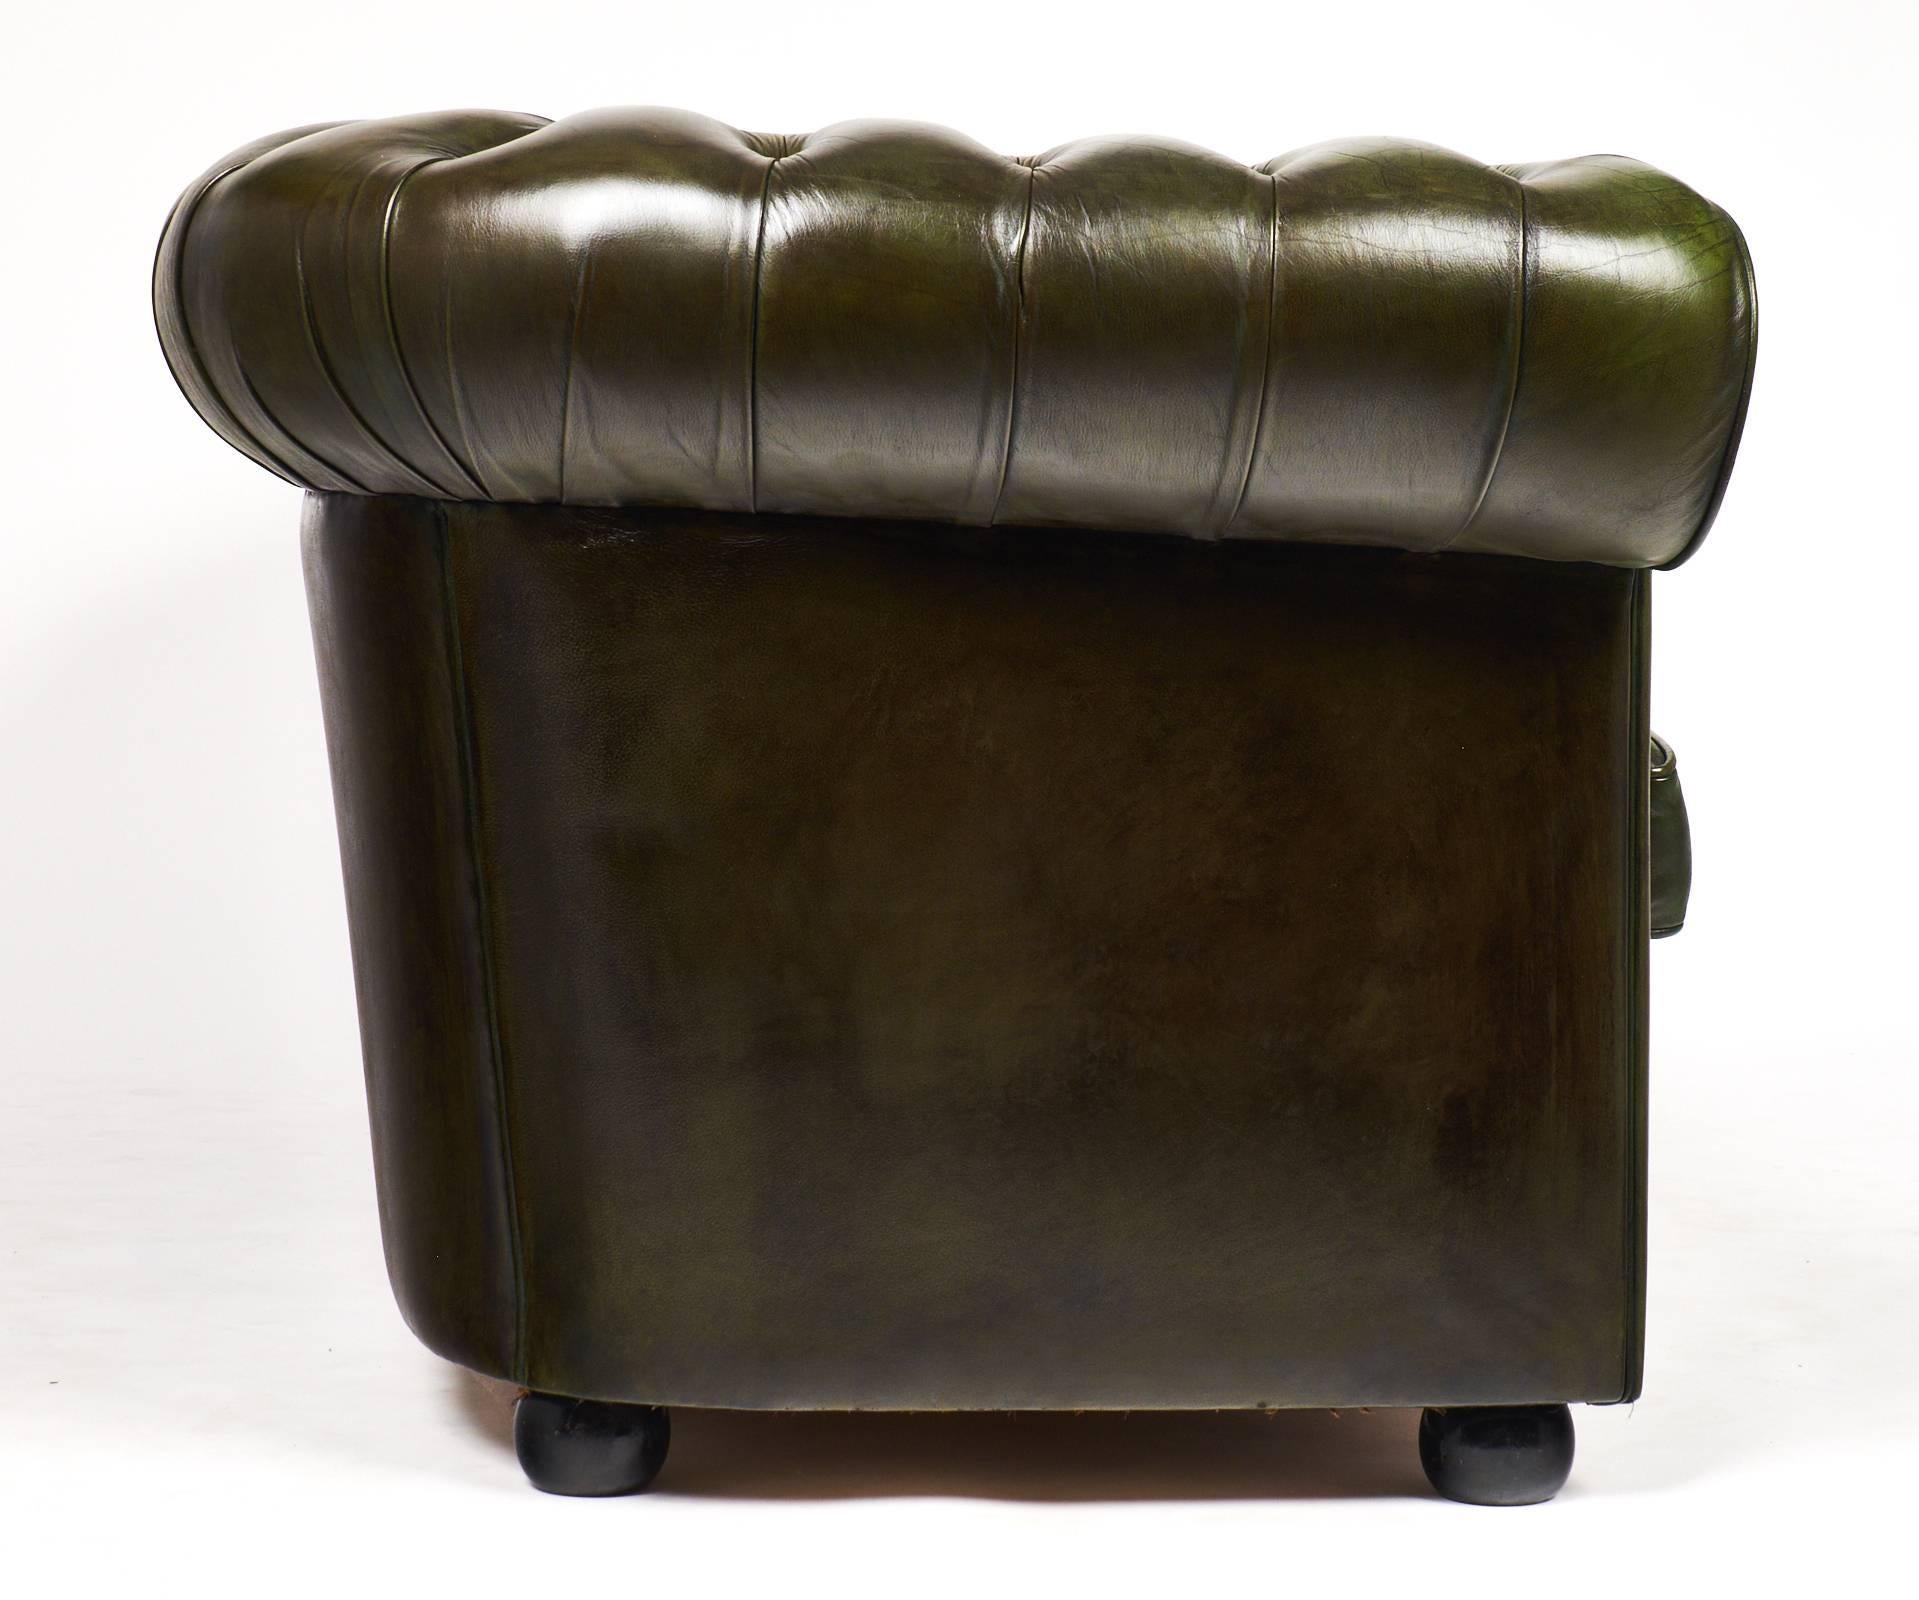 Mid-20th Century English Vintage Green or Bronze Chesterfield Sofa